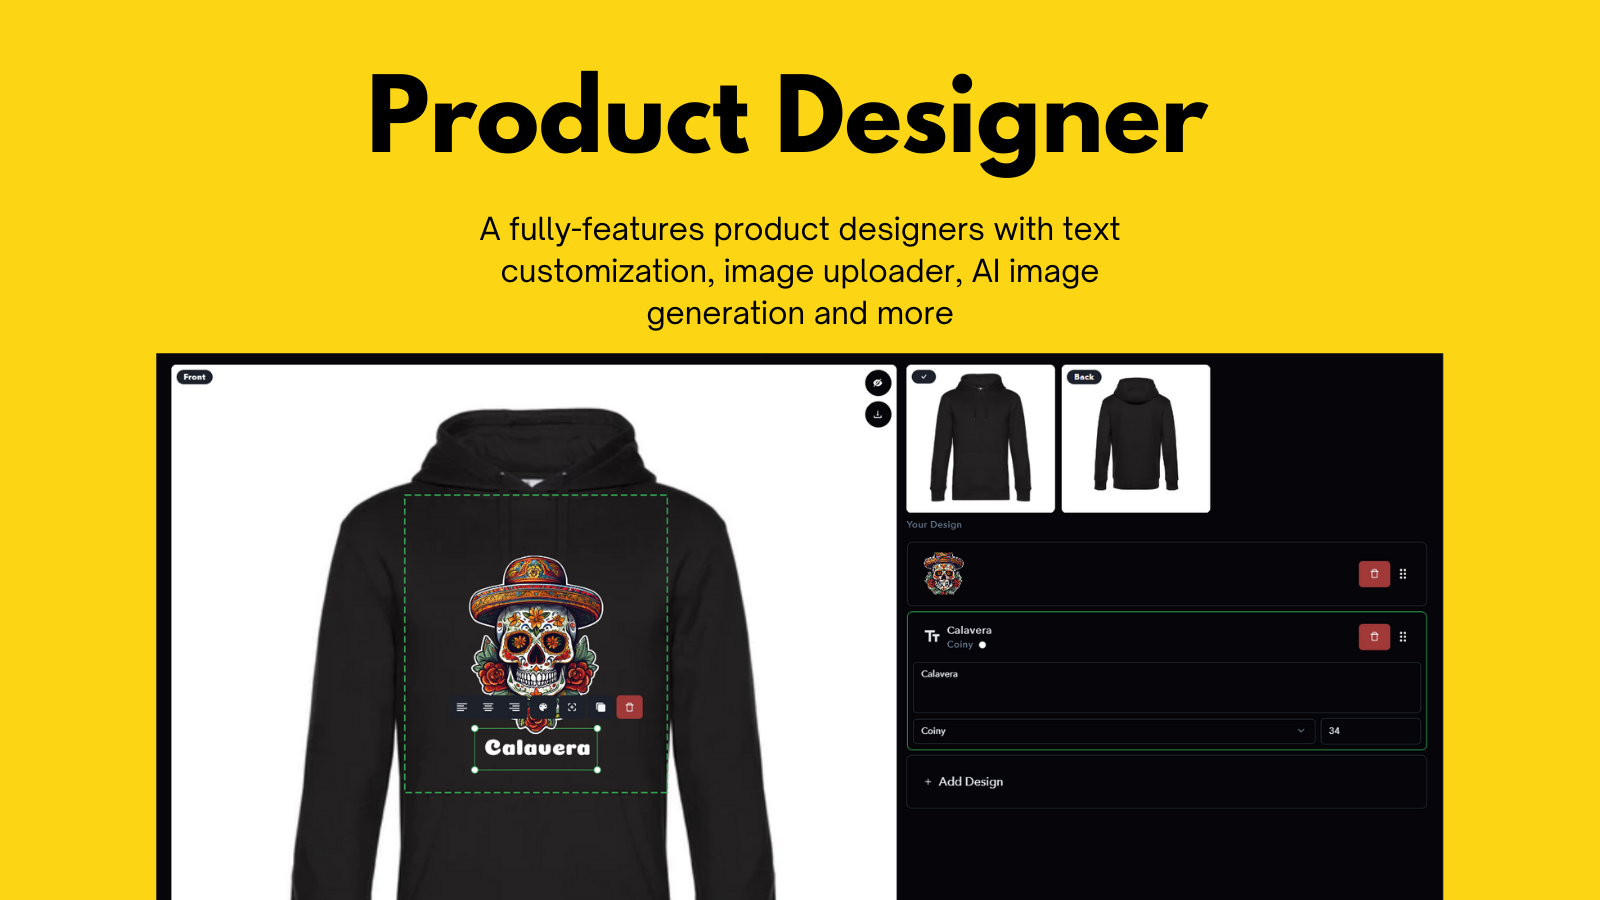 Product designer with image uploader and text customization